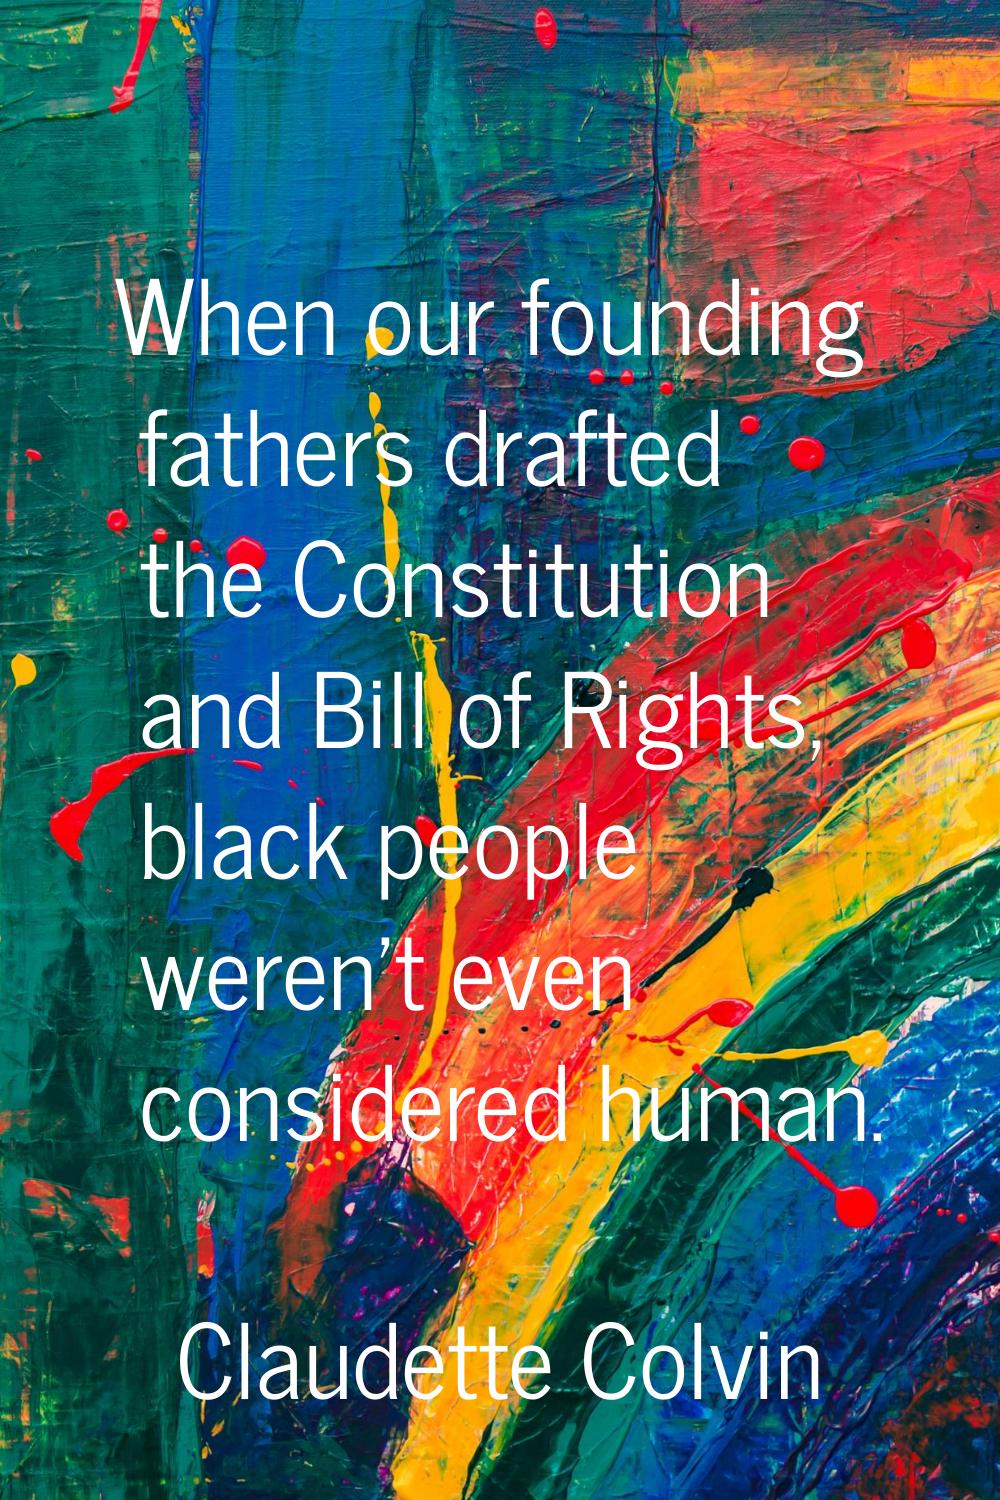 When our founding fathers drafted the Constitution and Bill of Rights, black people weren't even co